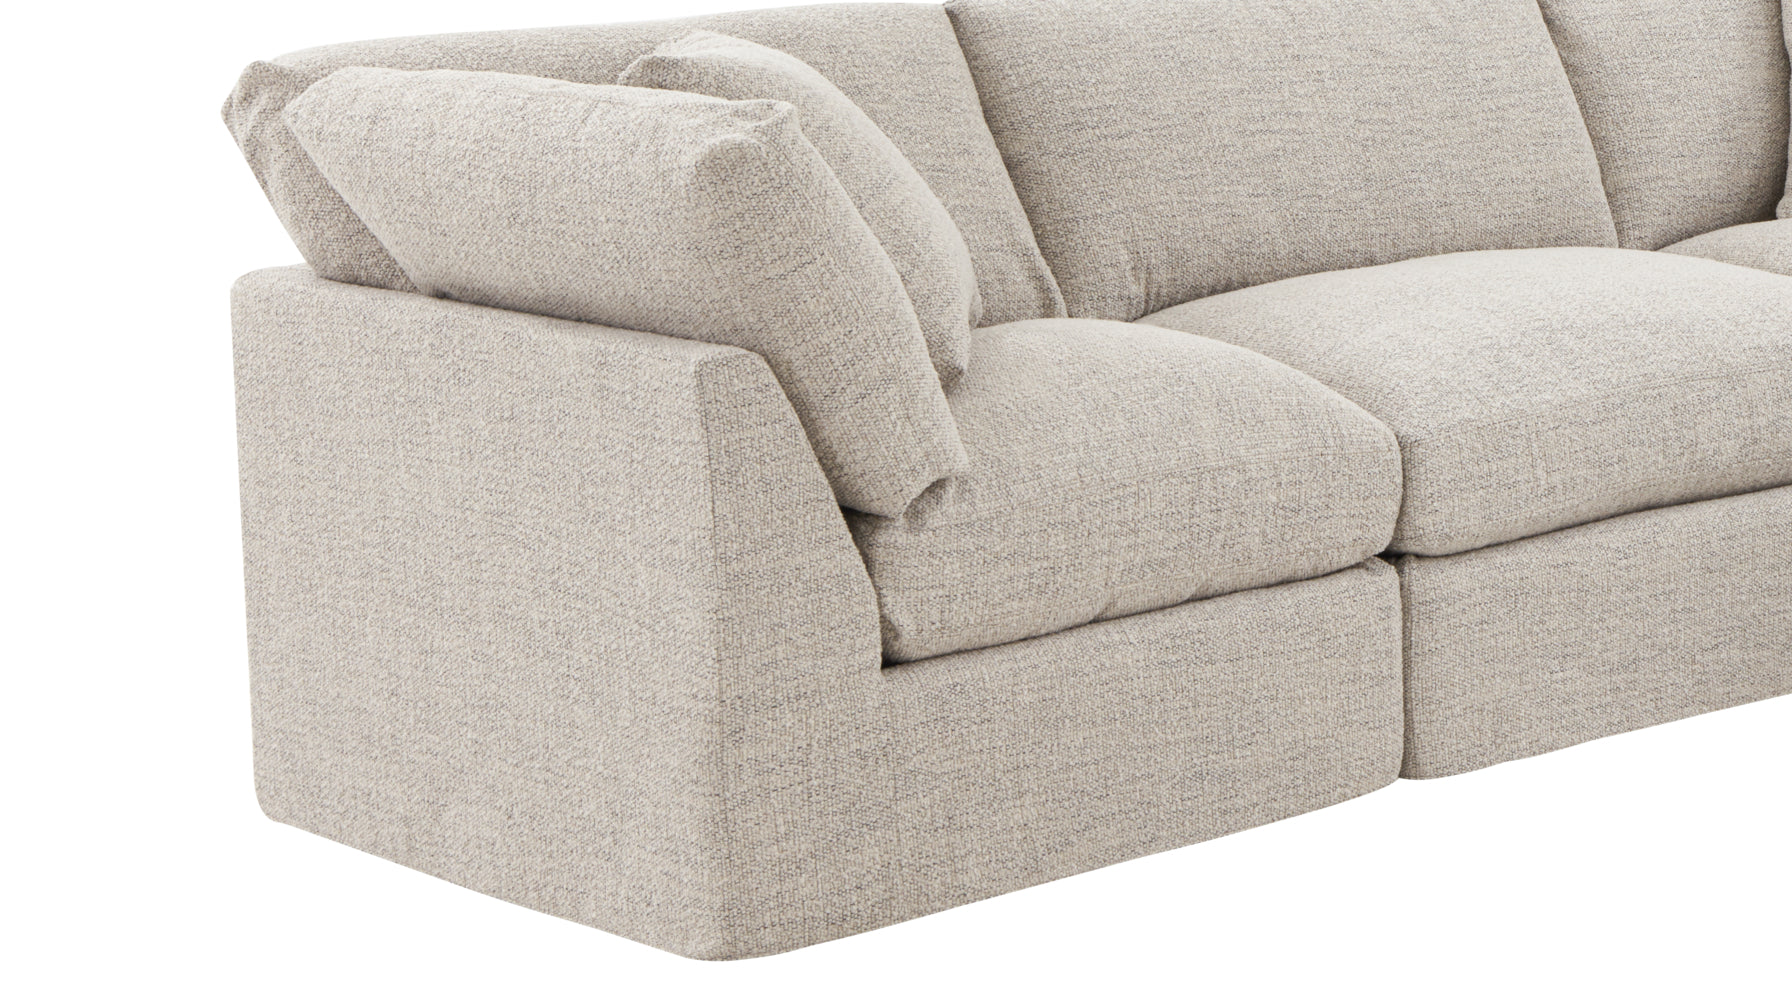 Get Together™ 5-Piece Modular Sectional Closed, Standard, Oatmeal - Image 7